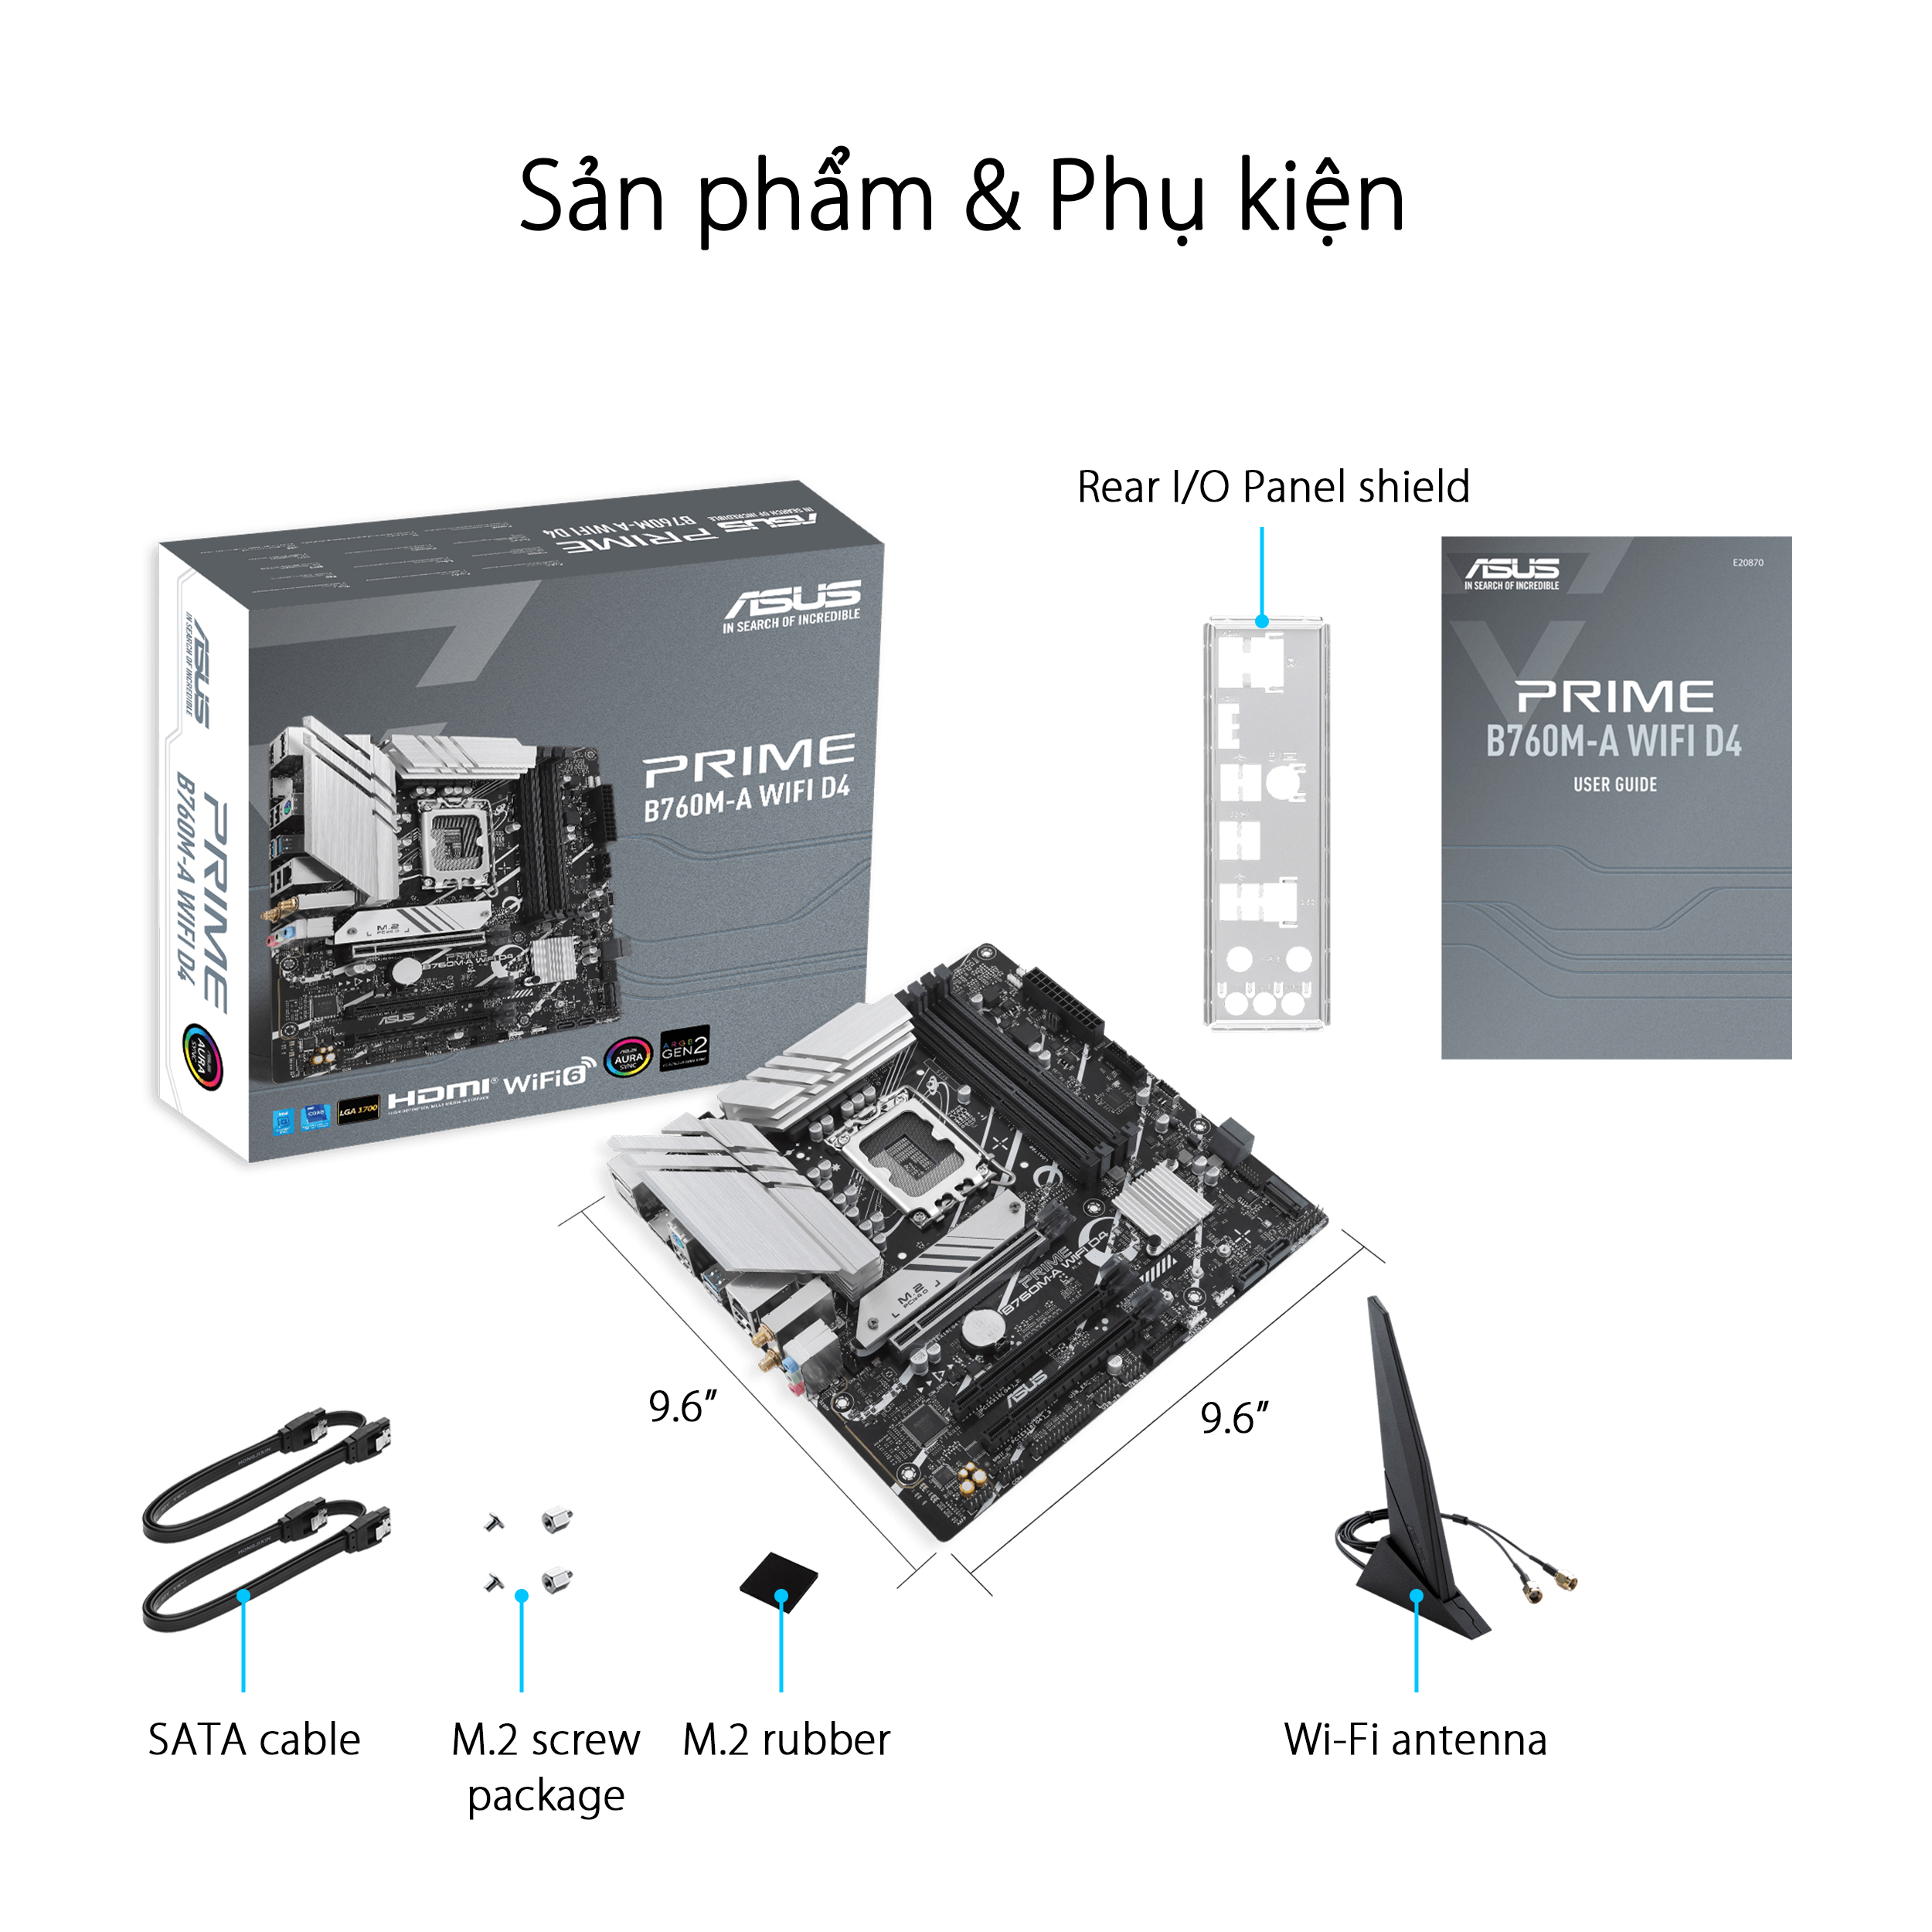 Mainboard ASUS PRIME B760M-A WIFI D4 